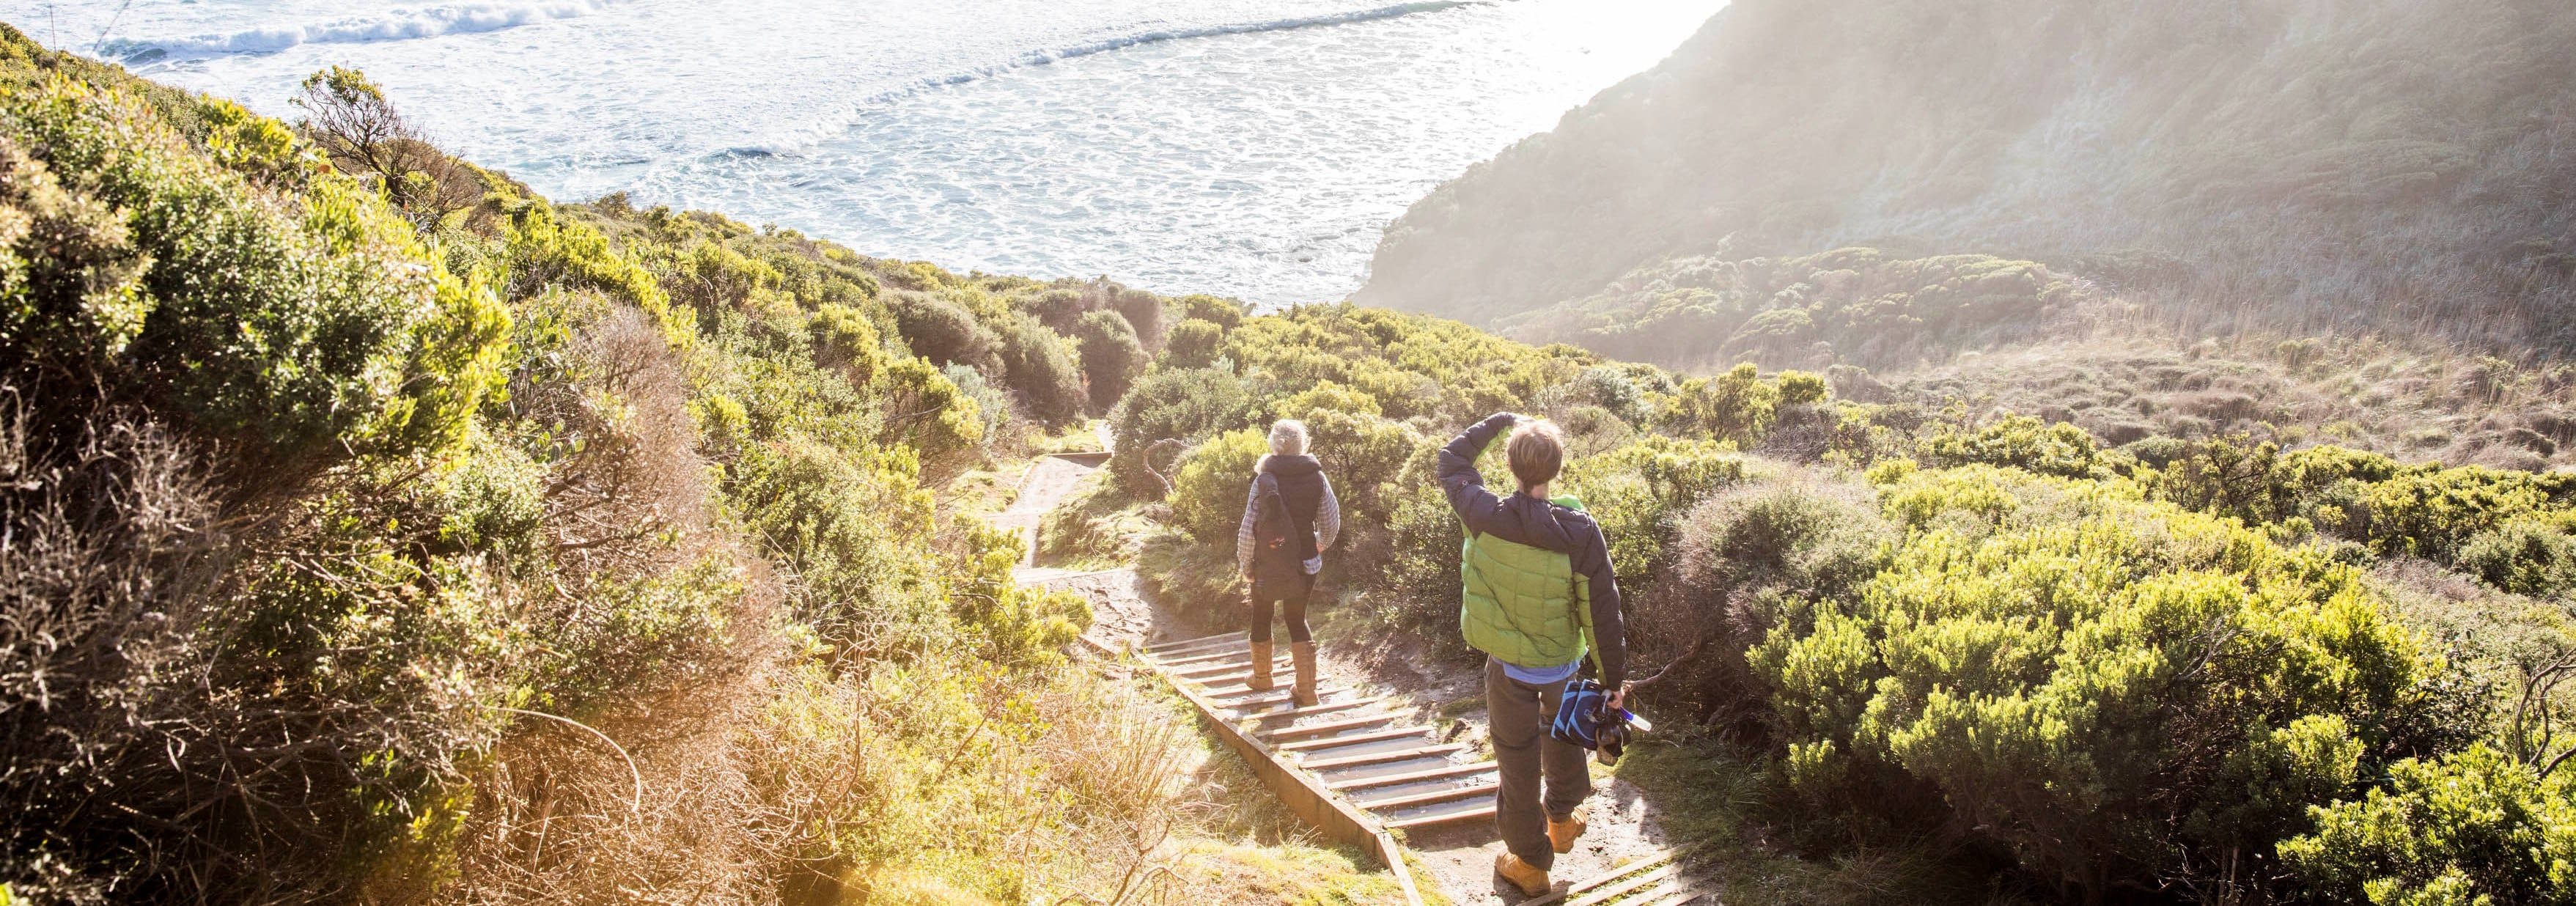 A Complete Guide To The Great Ocean Walk